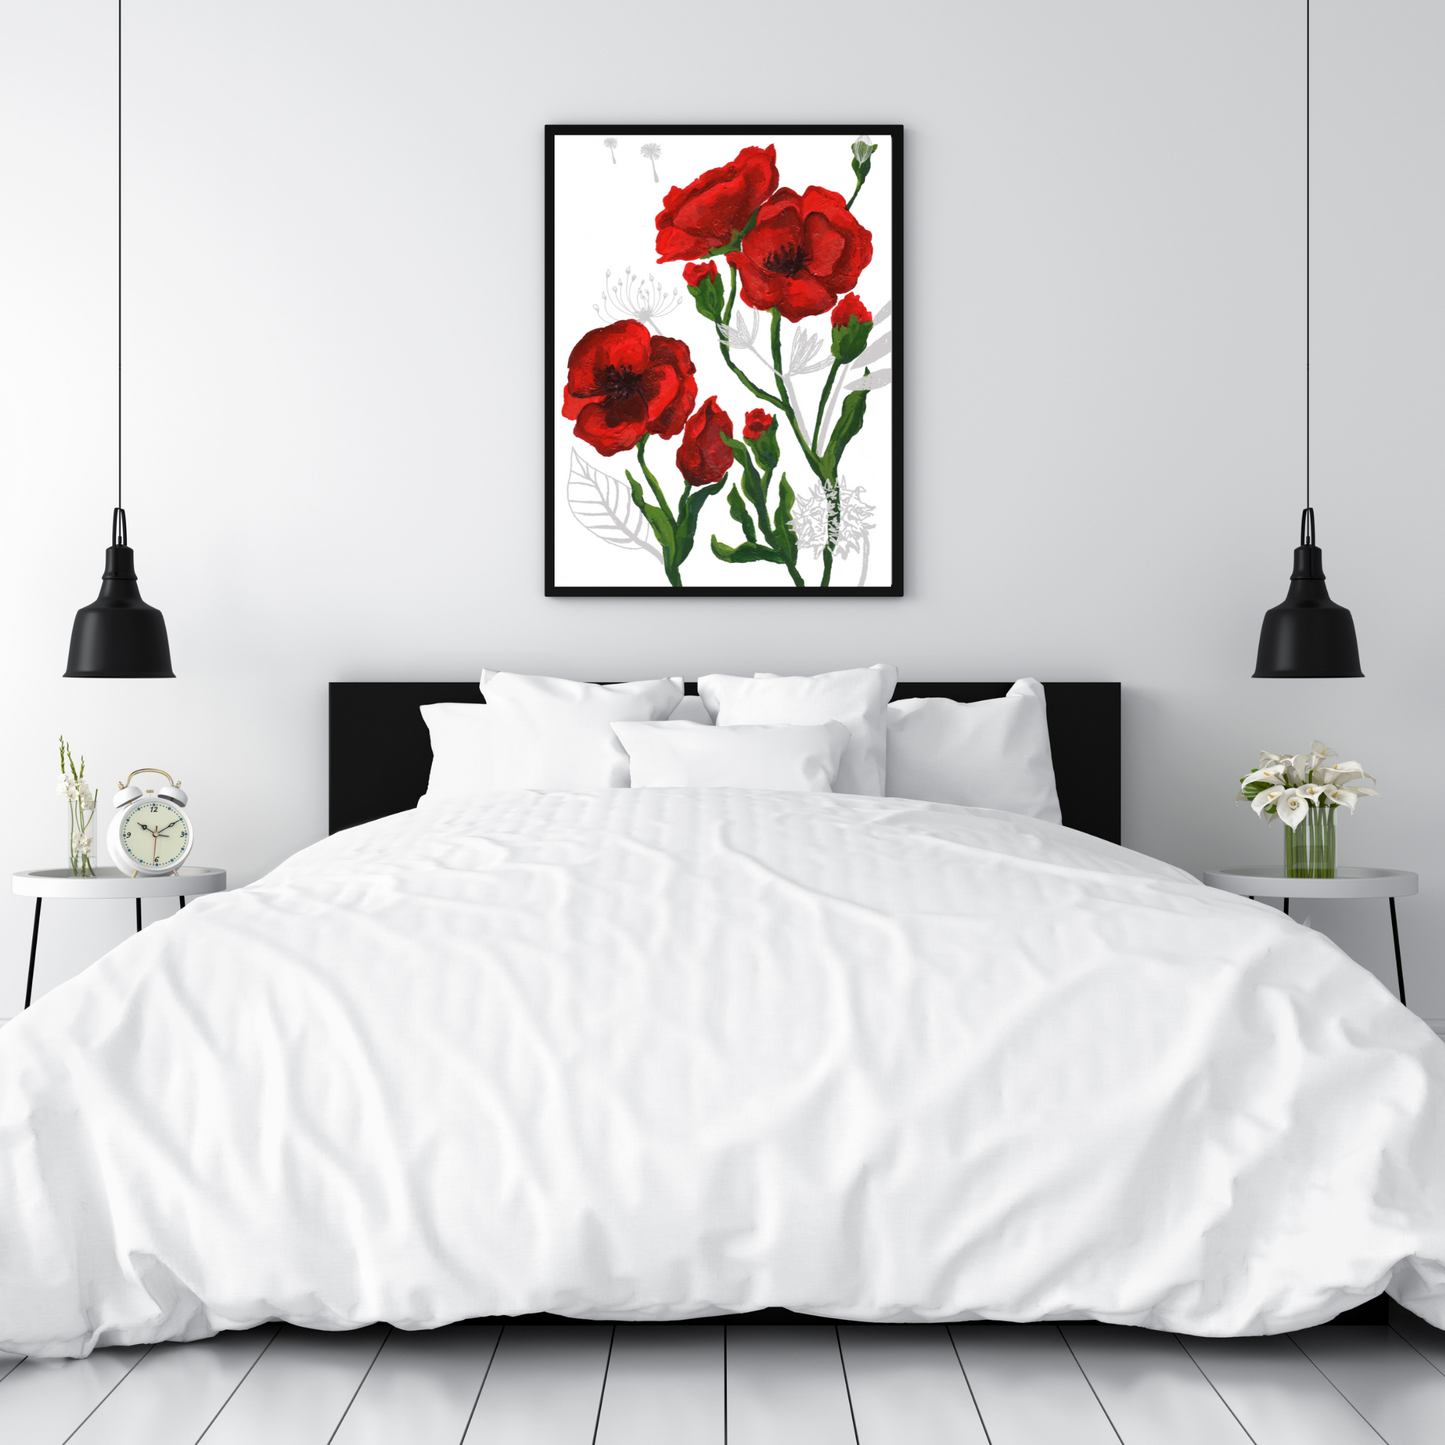 An example of the Sincere Beauty painting in a bedroom